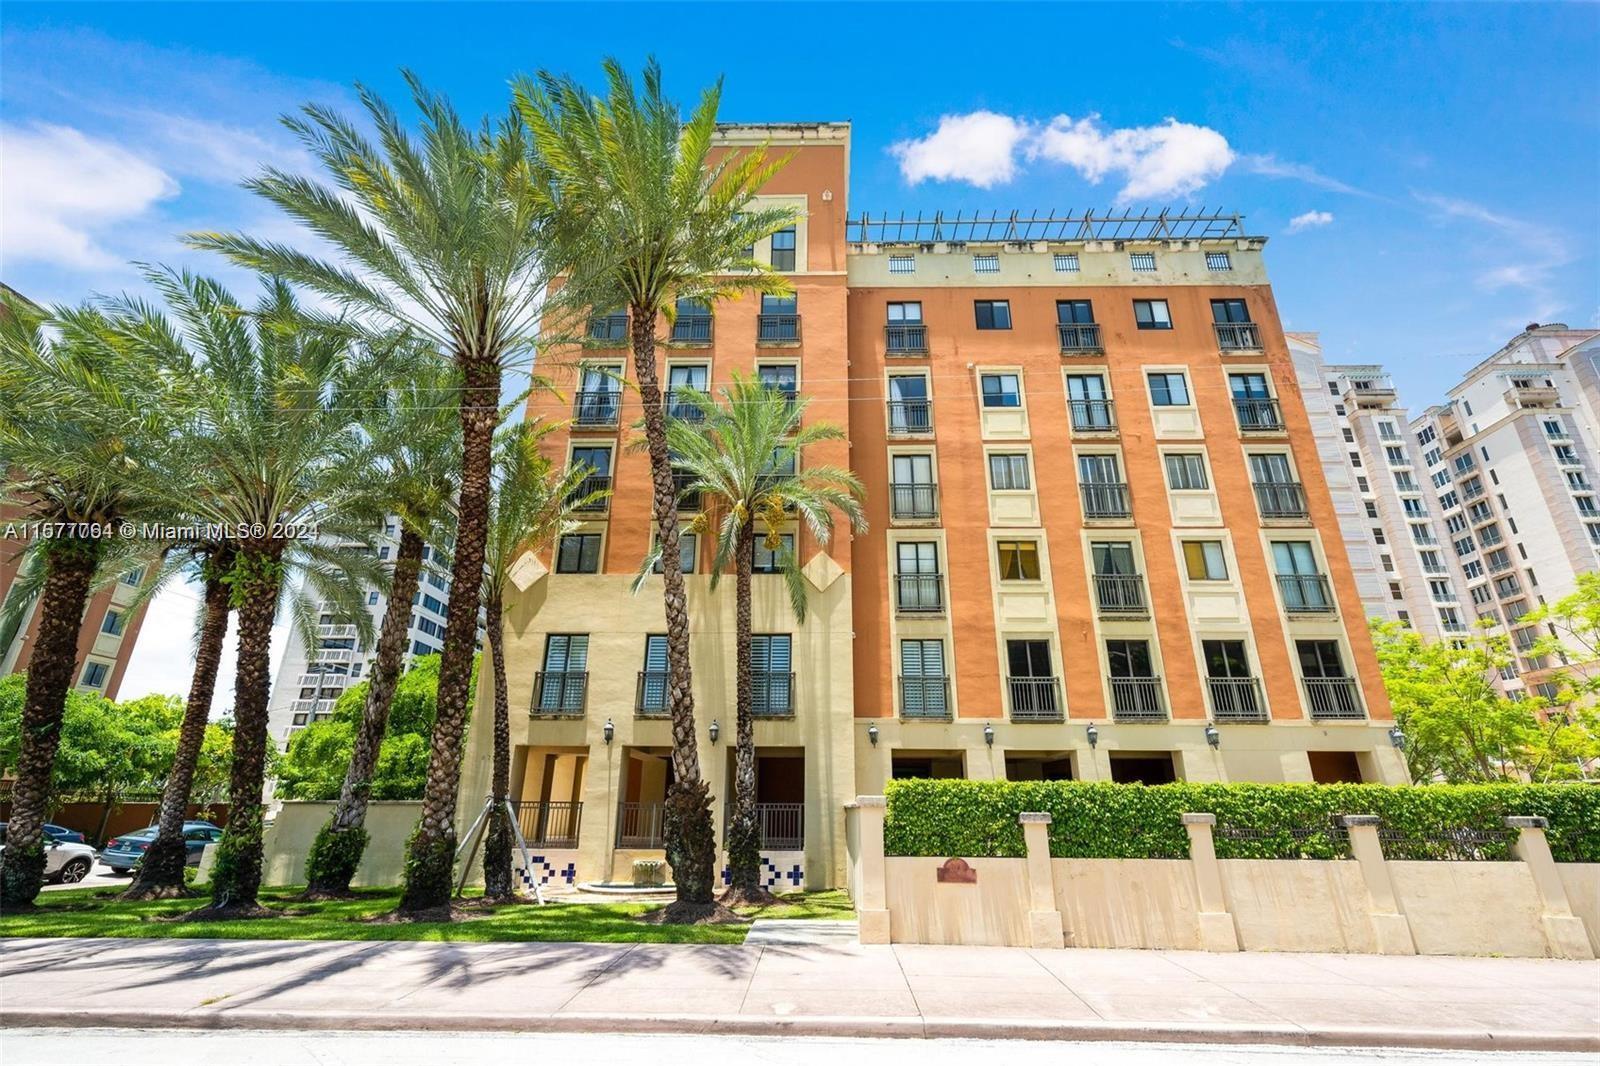 Photo of 671 Biltmore Wy #Ph in Coral Gables, FL